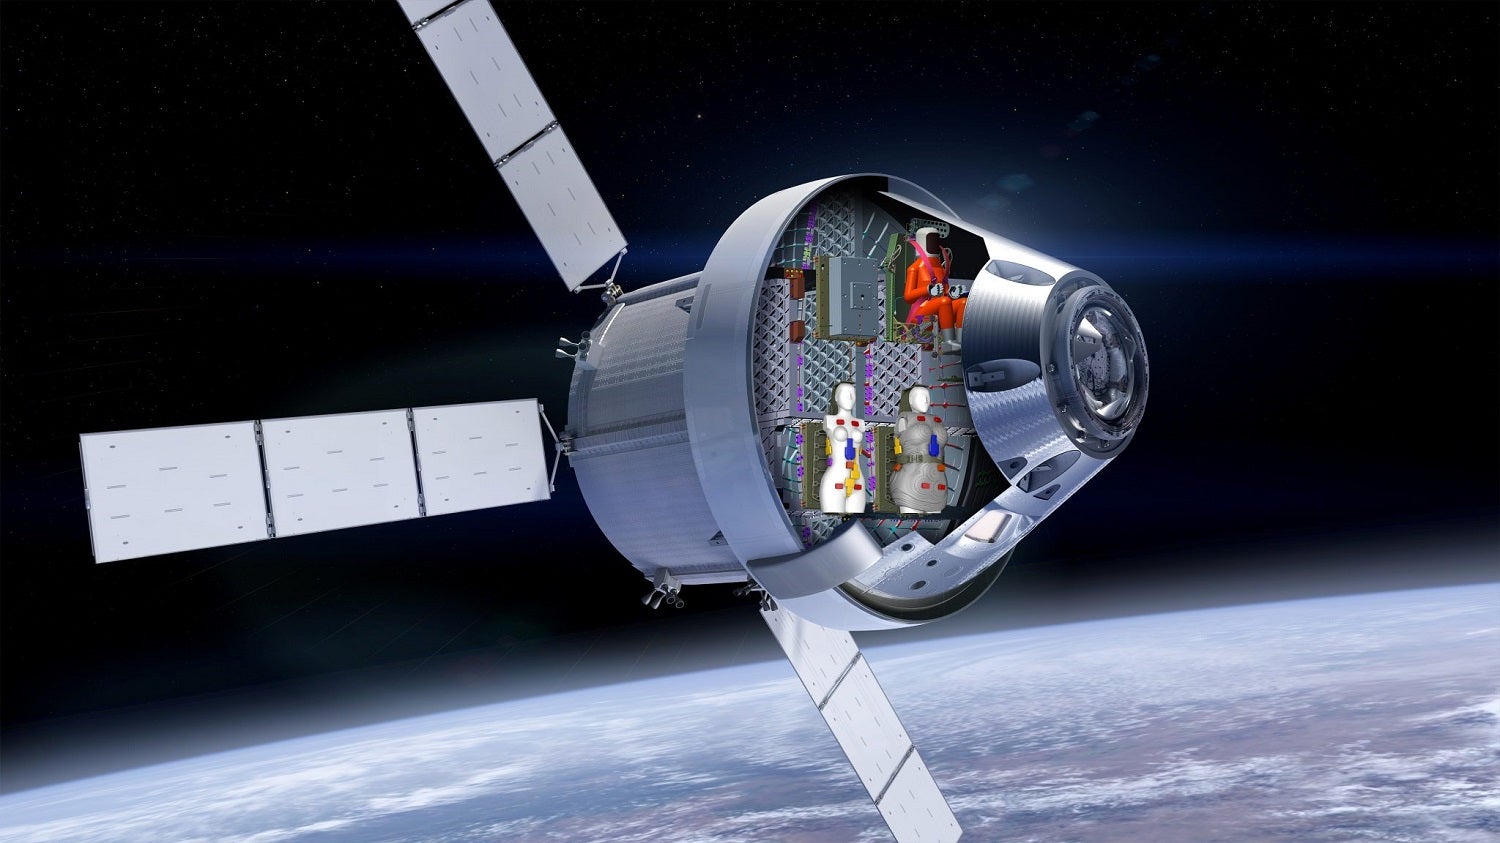 Female-shaped mannequins and male-shaped mannequin on Artemis I spacecraft in orbit in mockup